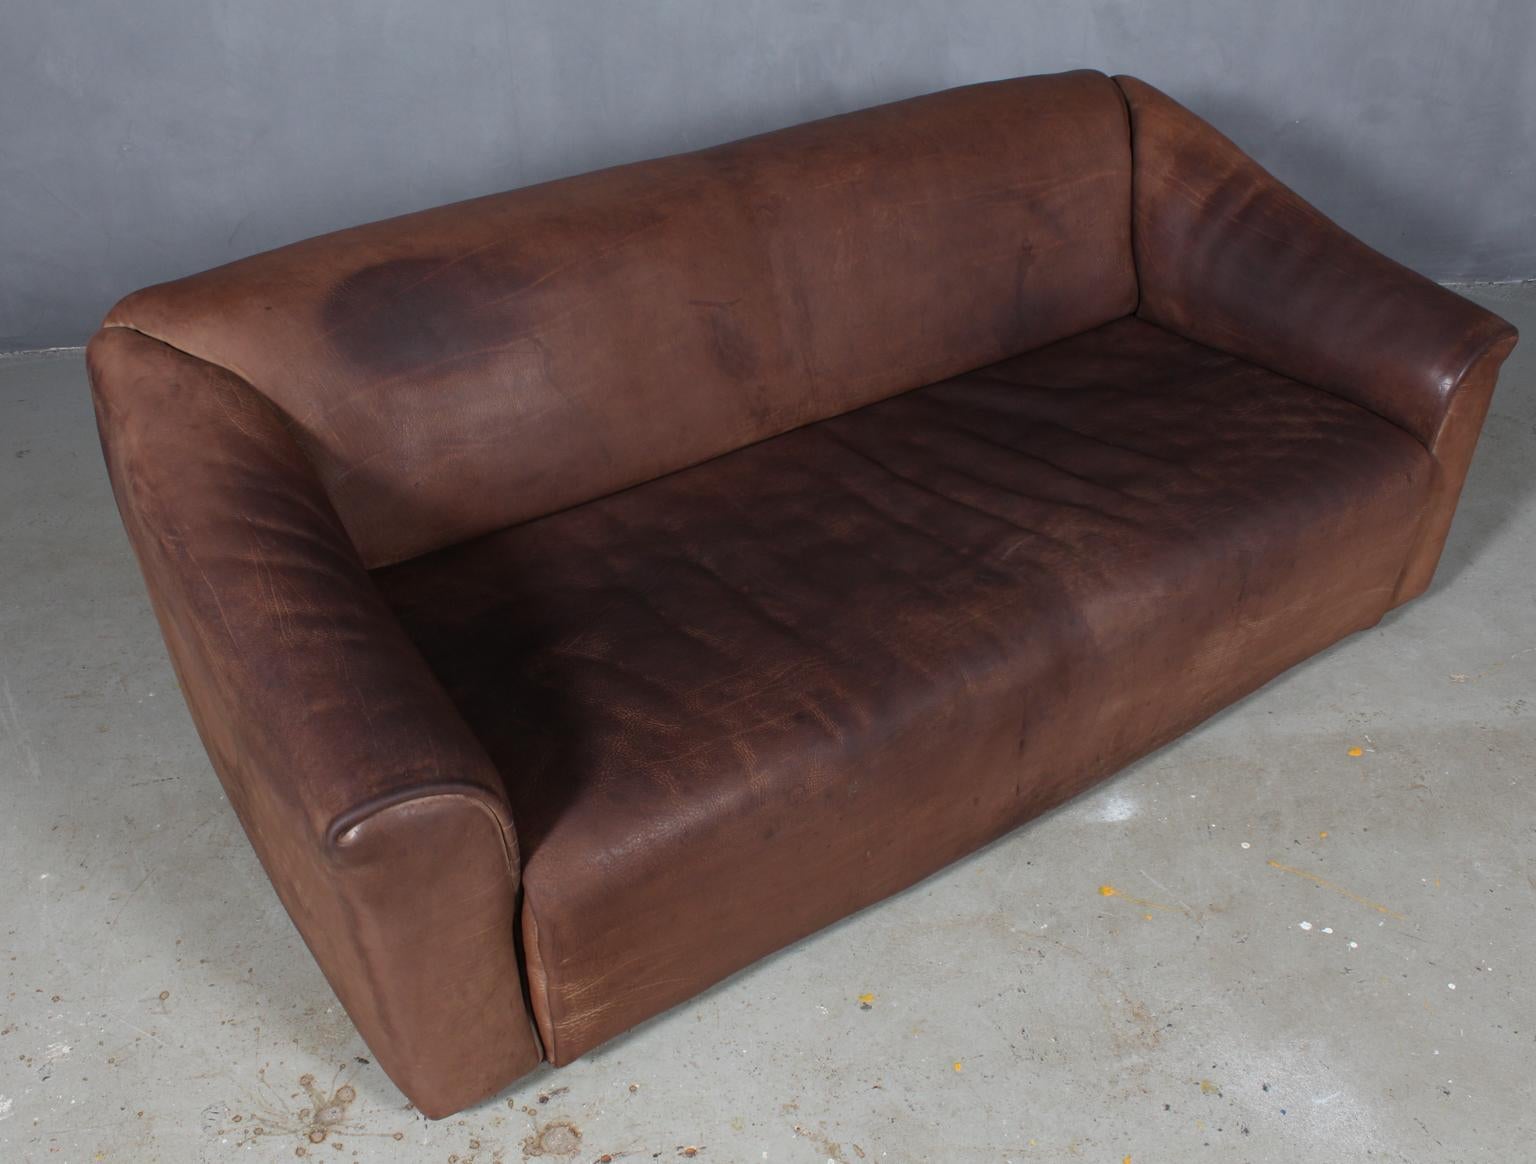 Highly comfortable DS47 sofa patinated leather by De Sede. The design is simplistic, yet very modern. A tight and cubic outside with a soft and curved inside, which emphasize the comfortable character of this set. The thick leather is laid in one